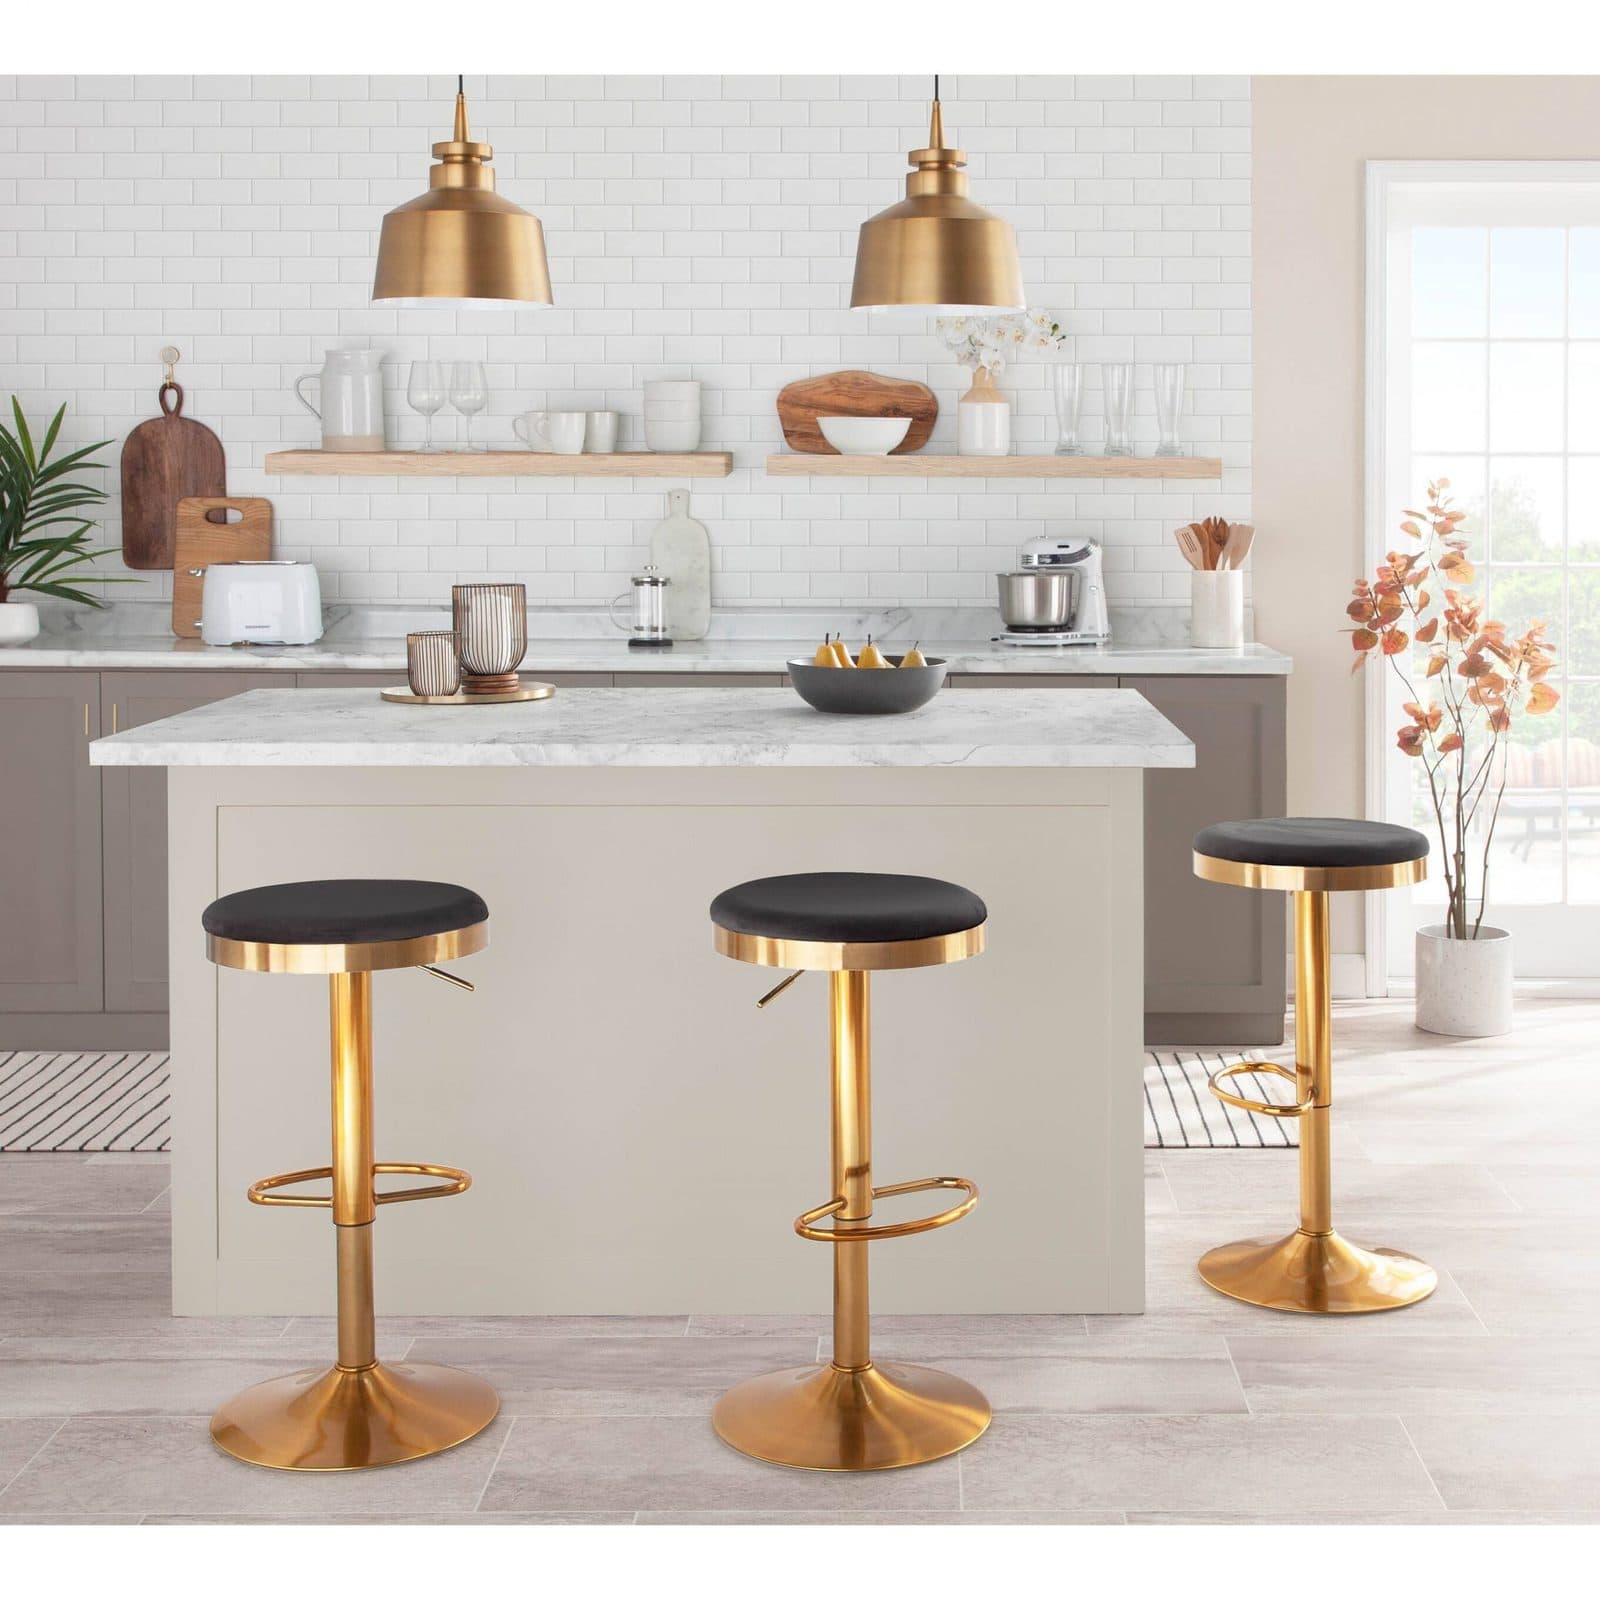 15 Best Stools For Kitchen Island, Island With Bar Stools